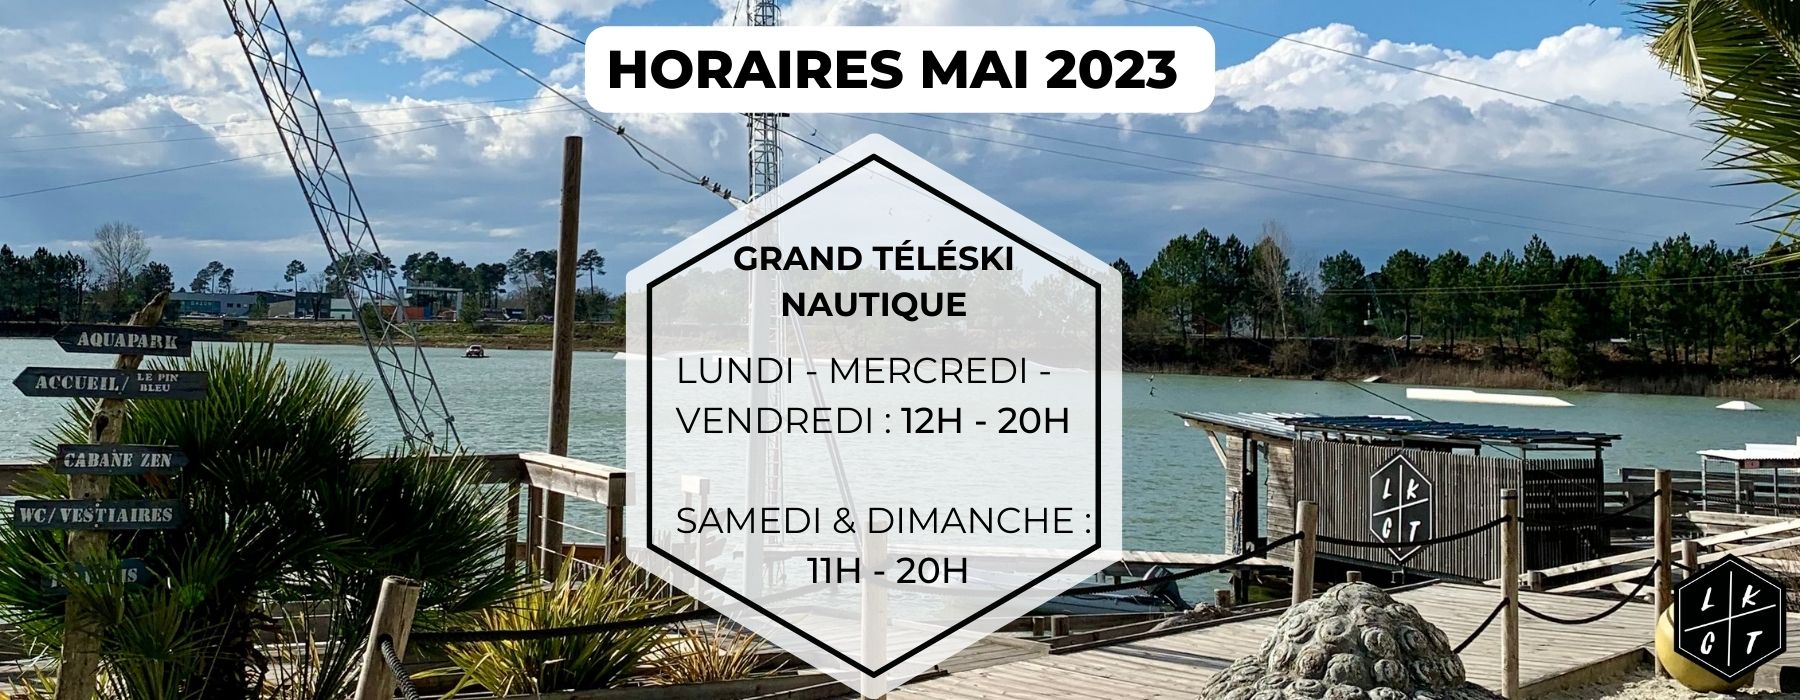 horaires mai 2023, wakeboard, lakecity